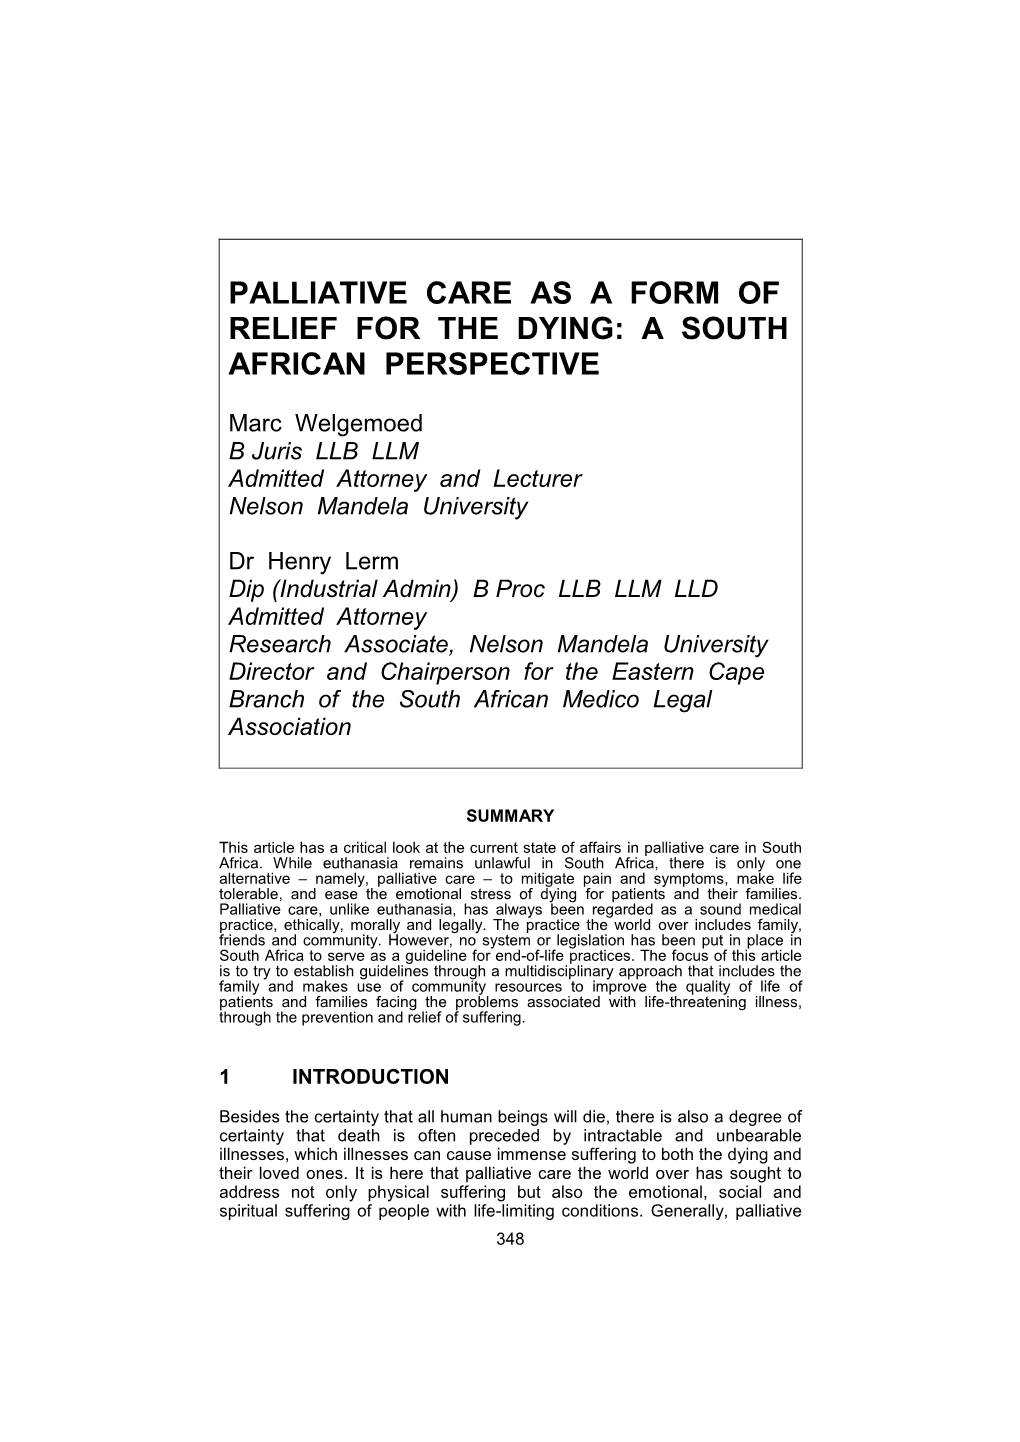 Palliative Care As a Form of Relief for the Dying: a South African Perspective